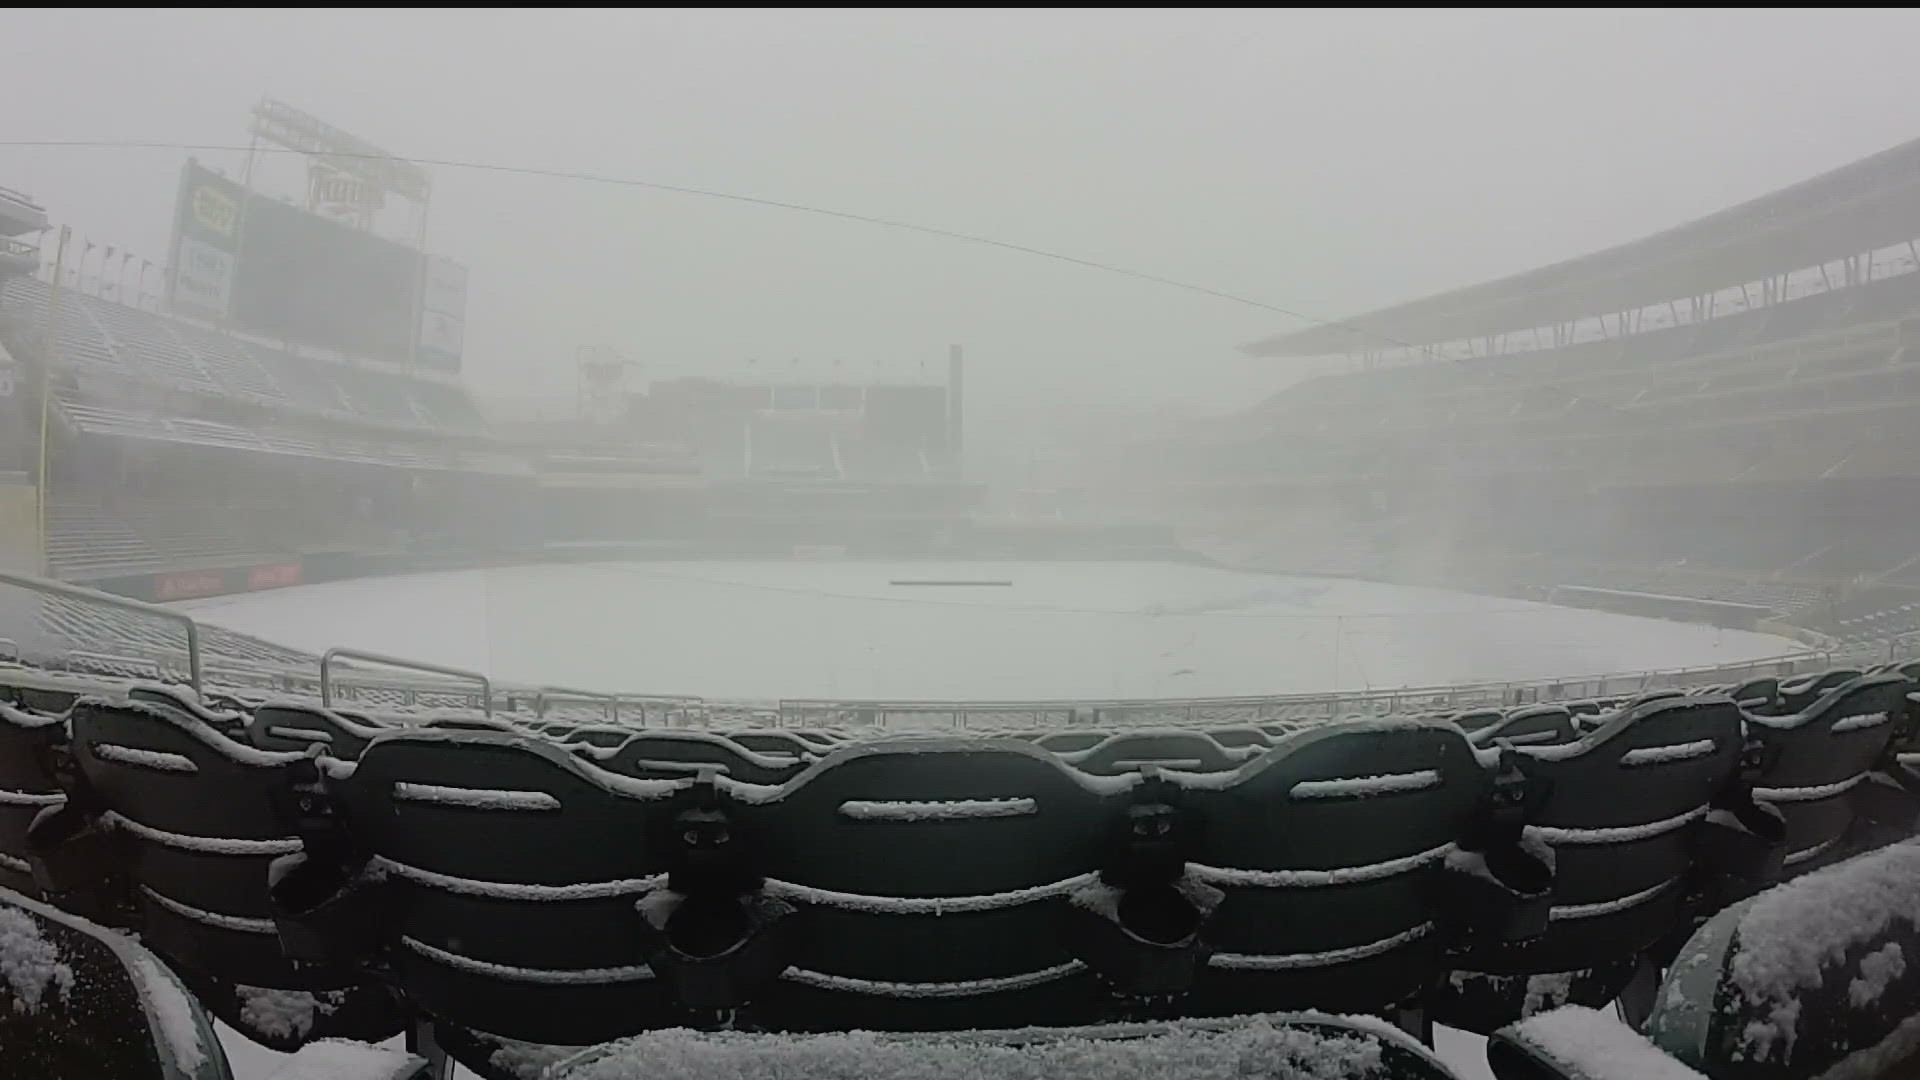 Decisions to play, cancel or postpone an MLB game often fall to the Twins weather team.